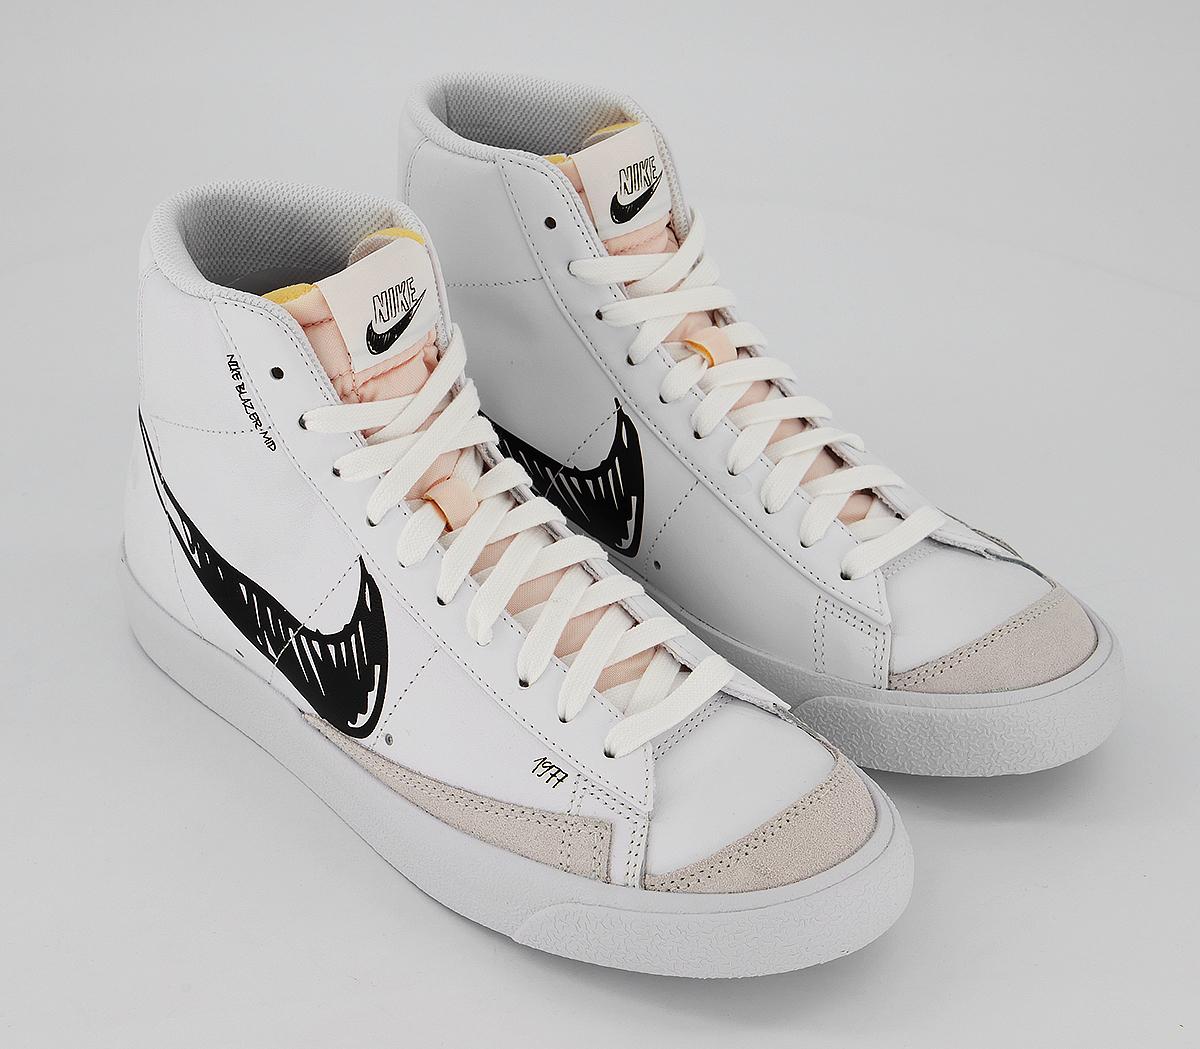 Nike Blazer Mid 77 Trainers White Black Scribble His trainers